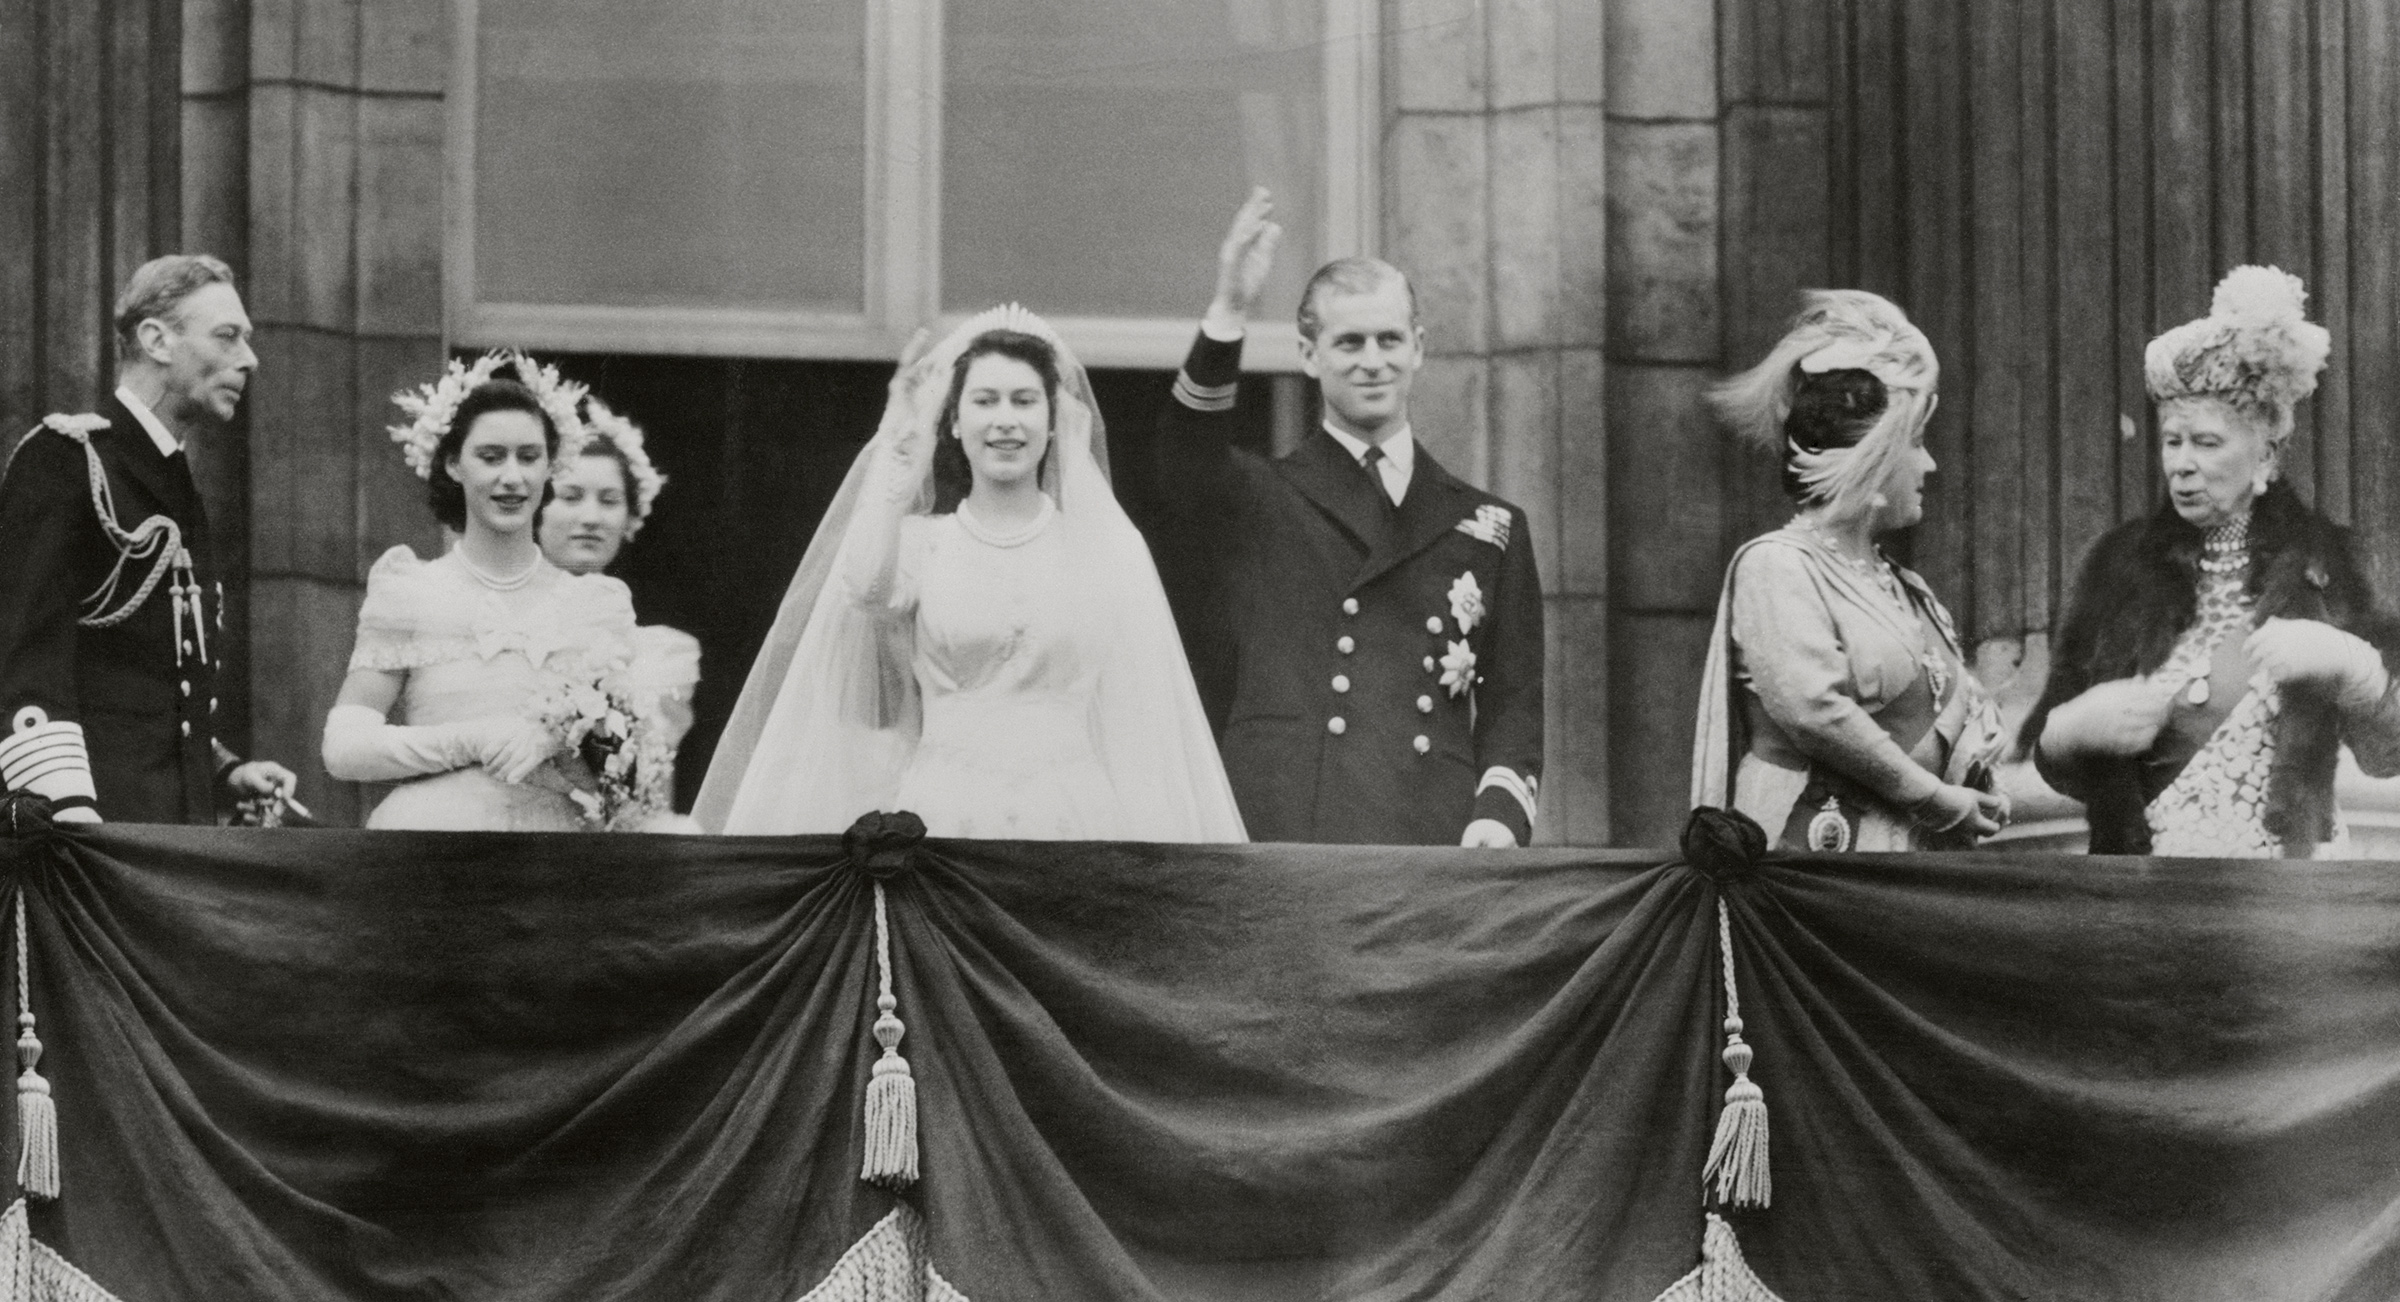 Princess Elizabeth and Philip Mountbatten, Duke of Edinburgh, wave from a balcony at Buckingham Palace in London, shortly after their wedding on Nov. 20, 1947. (Bettmann Archive/Getty Images)